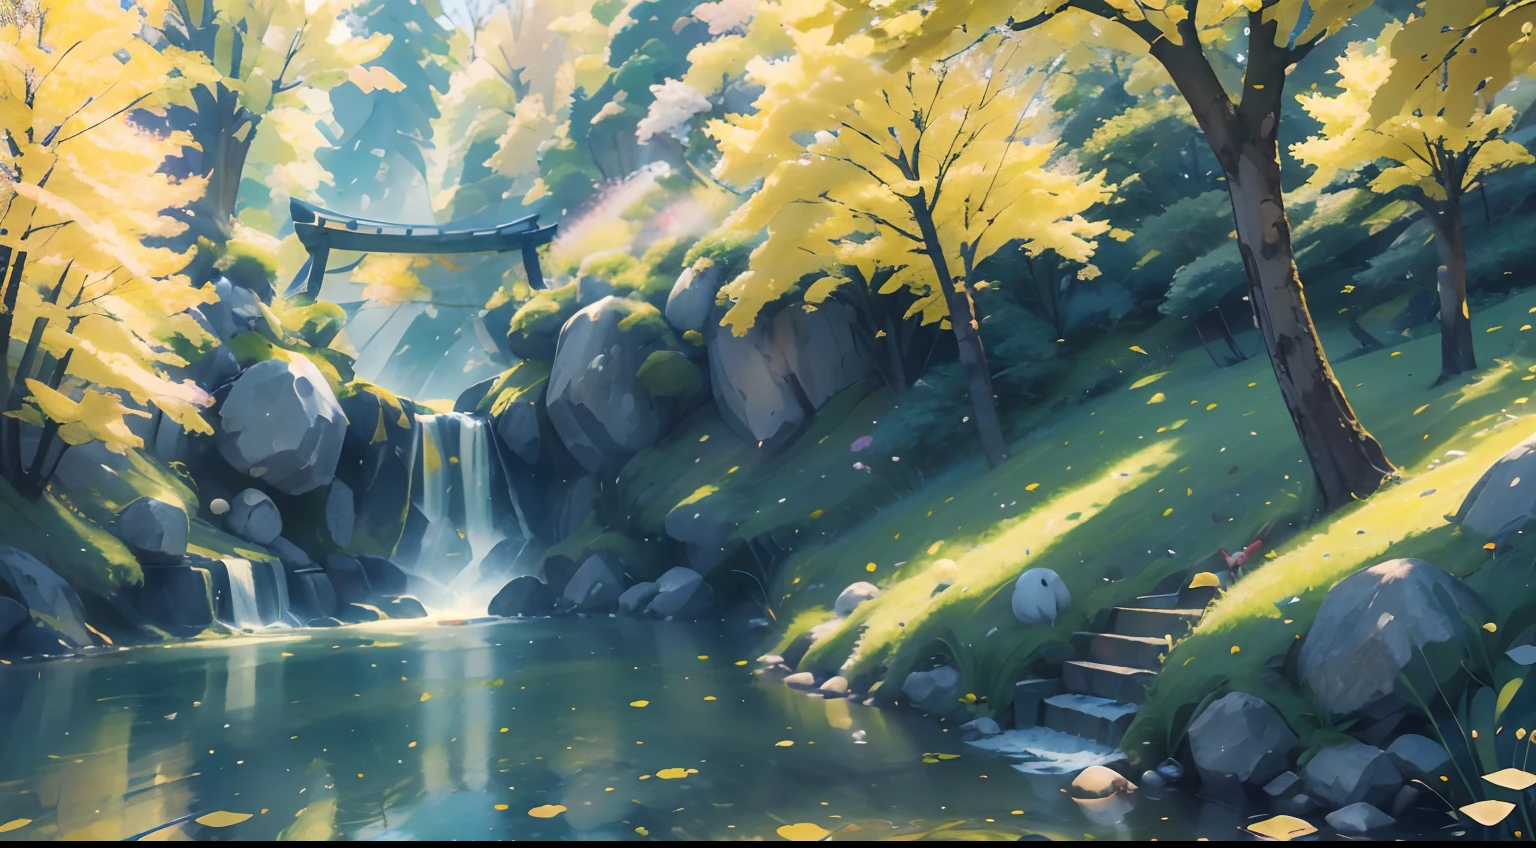 Yellow ginkgo tree，There is a cartoon , A panda， and panda walk under yellow ginkgo trees, There are a lot of ginkgo leaves on the ground，Overlooking, landscape,Morning, Soft light, Ray tracing, ghibli artstyle, hand painted style